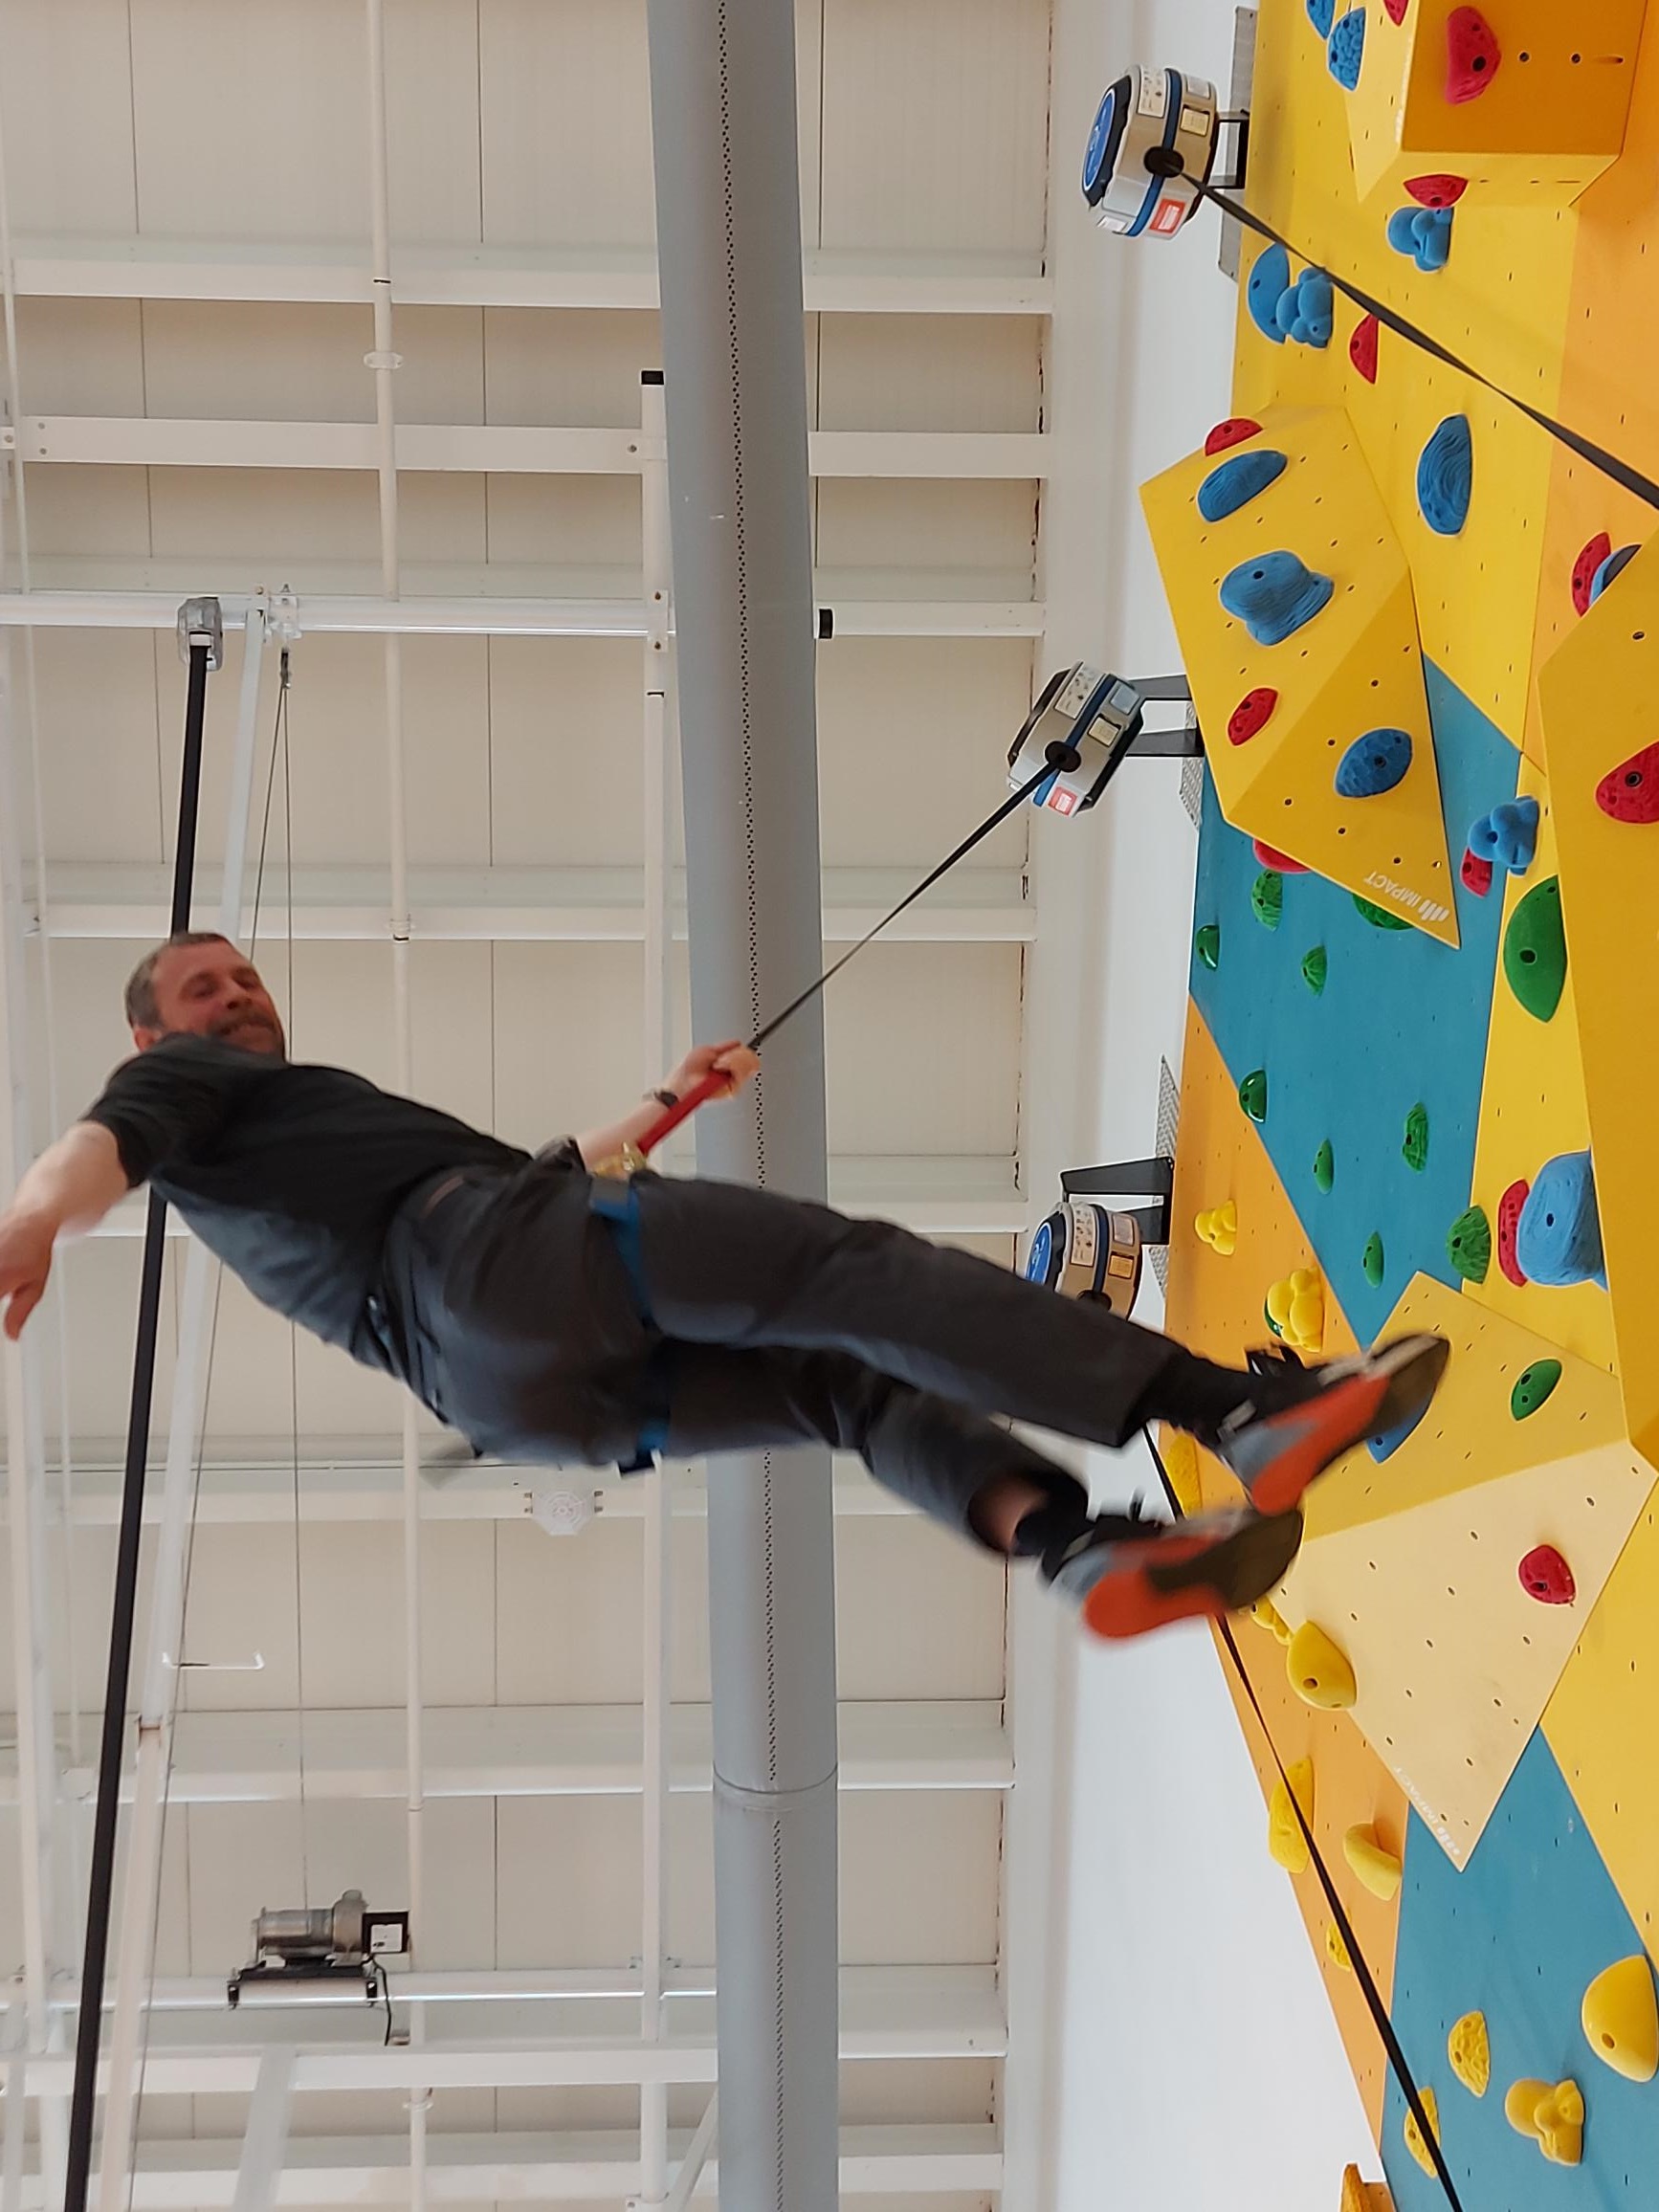 A man descending from the top of a rick climbing wall